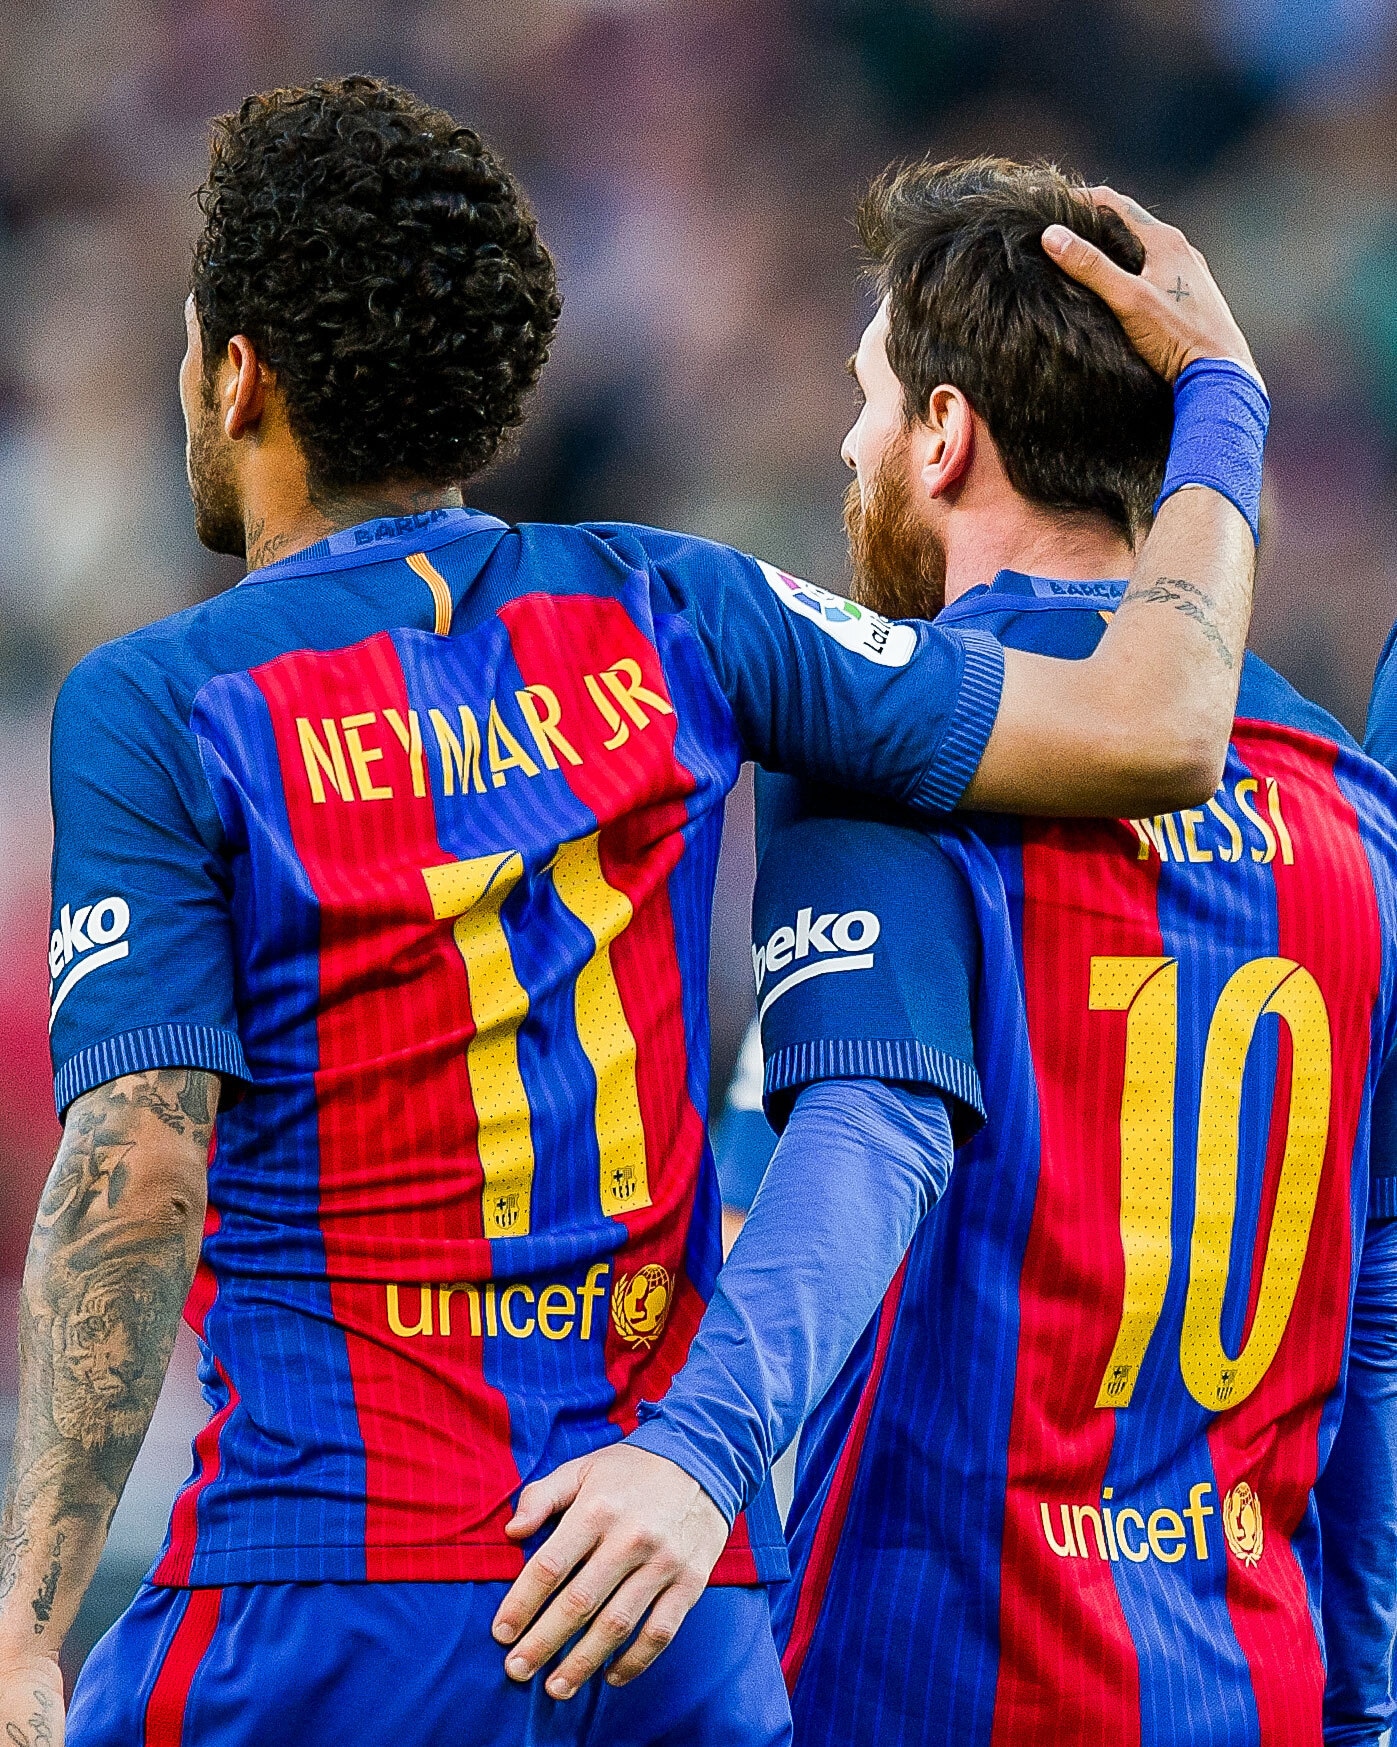 Managing Barça on Twitter: "Neymar: went to PSG in 2017, have wanted to  come back to FC Barcelona since. Messi: went to PSG in 2021, wants to come  back to FC Barcelona.